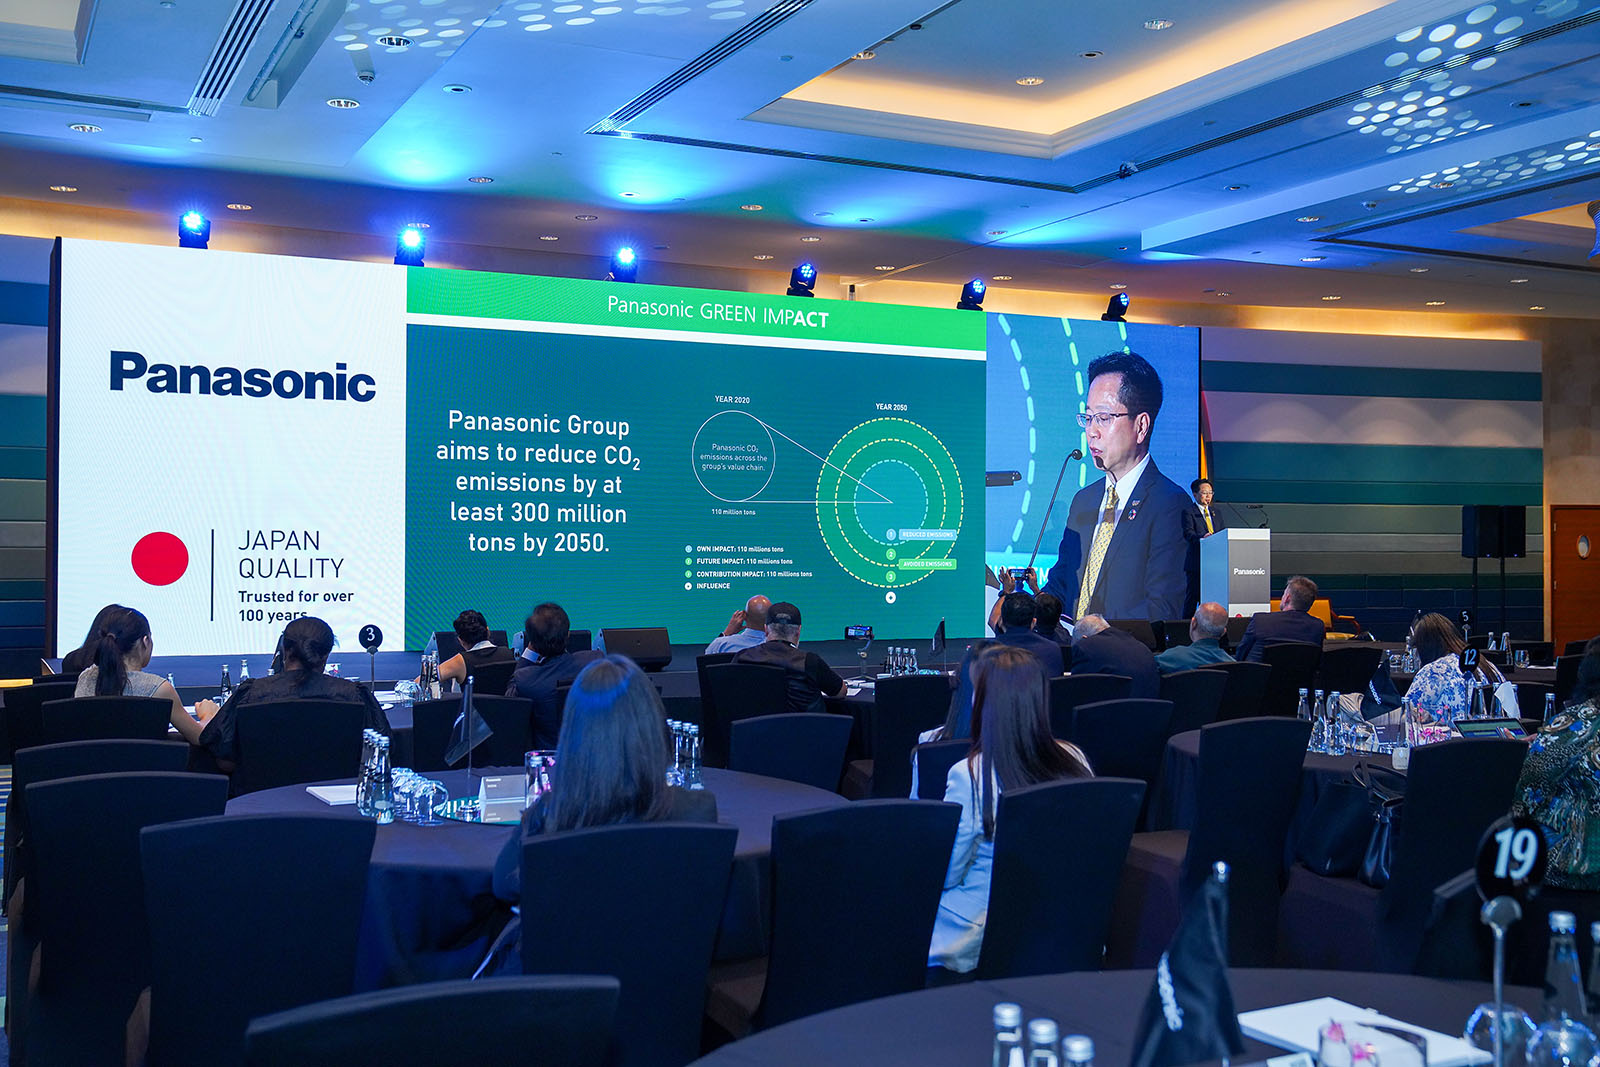 Photo: PMMAF Annual Dealers Convention in Dubai